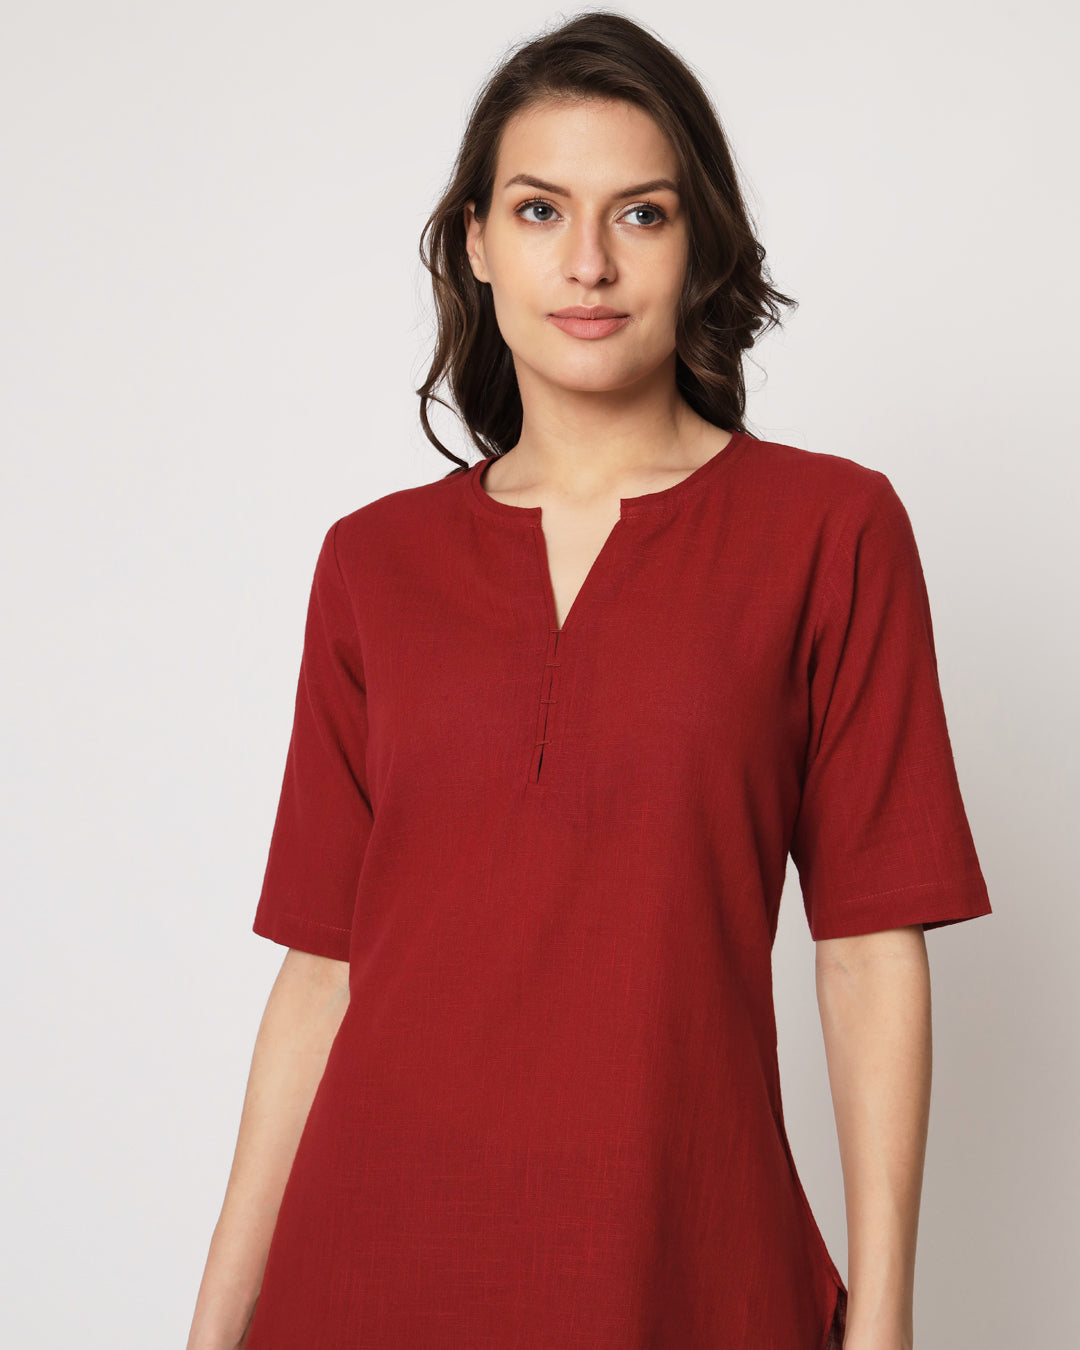 Classic Red Collar Neck Short Length Solid Kurta (Without Bottoms)